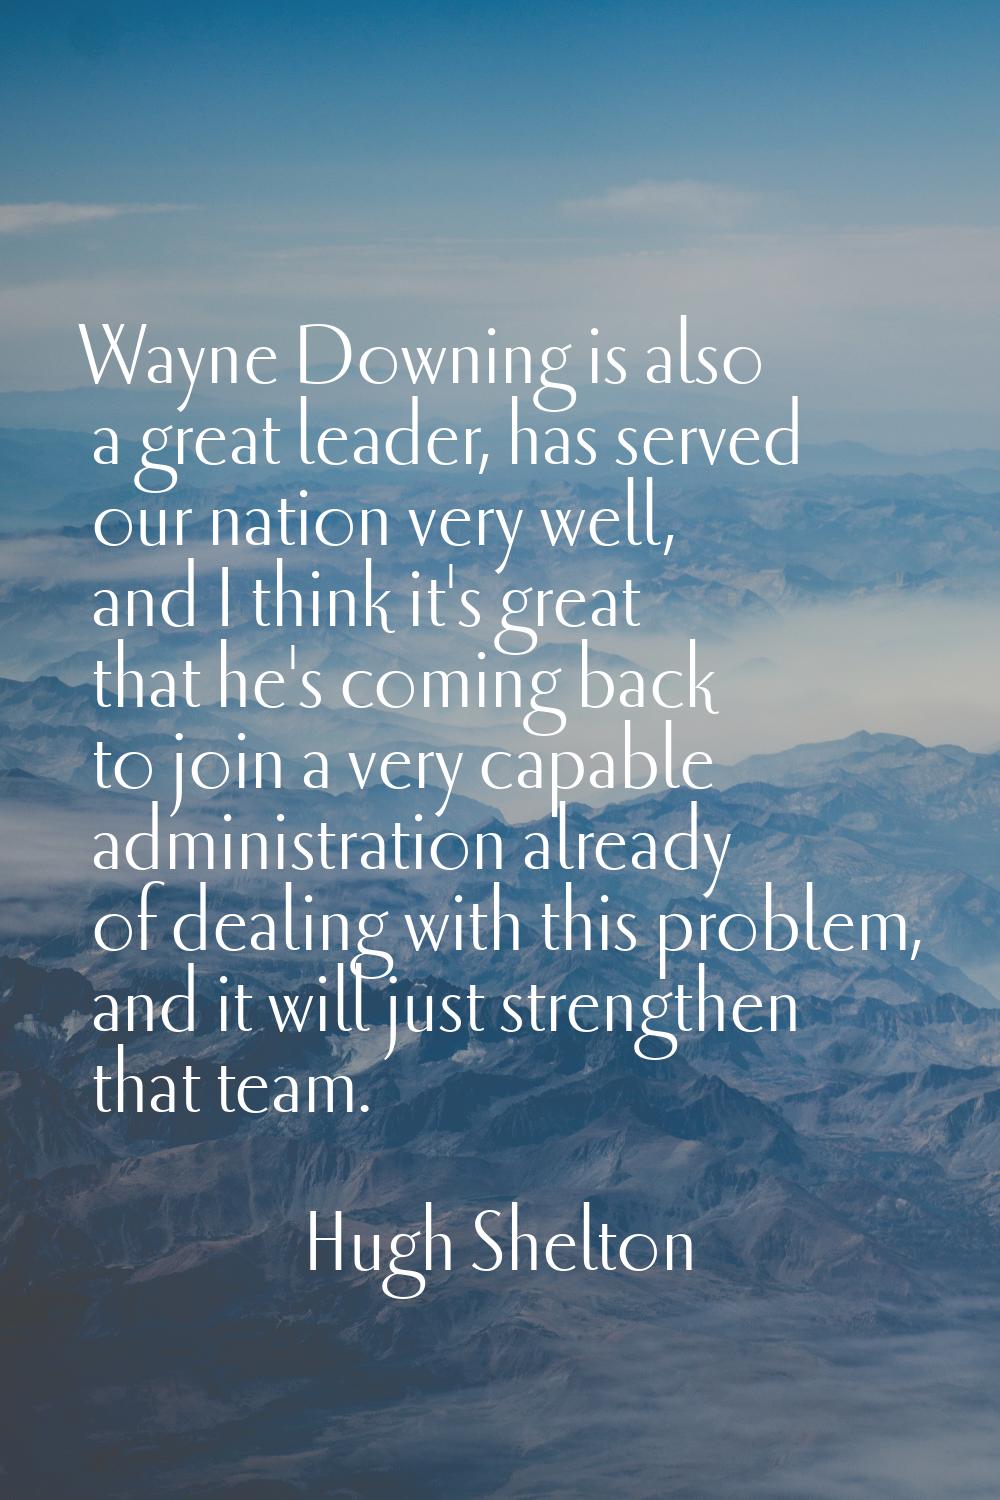 Wayne Downing is also a great leader, has served our nation very well, and I think it's great that 